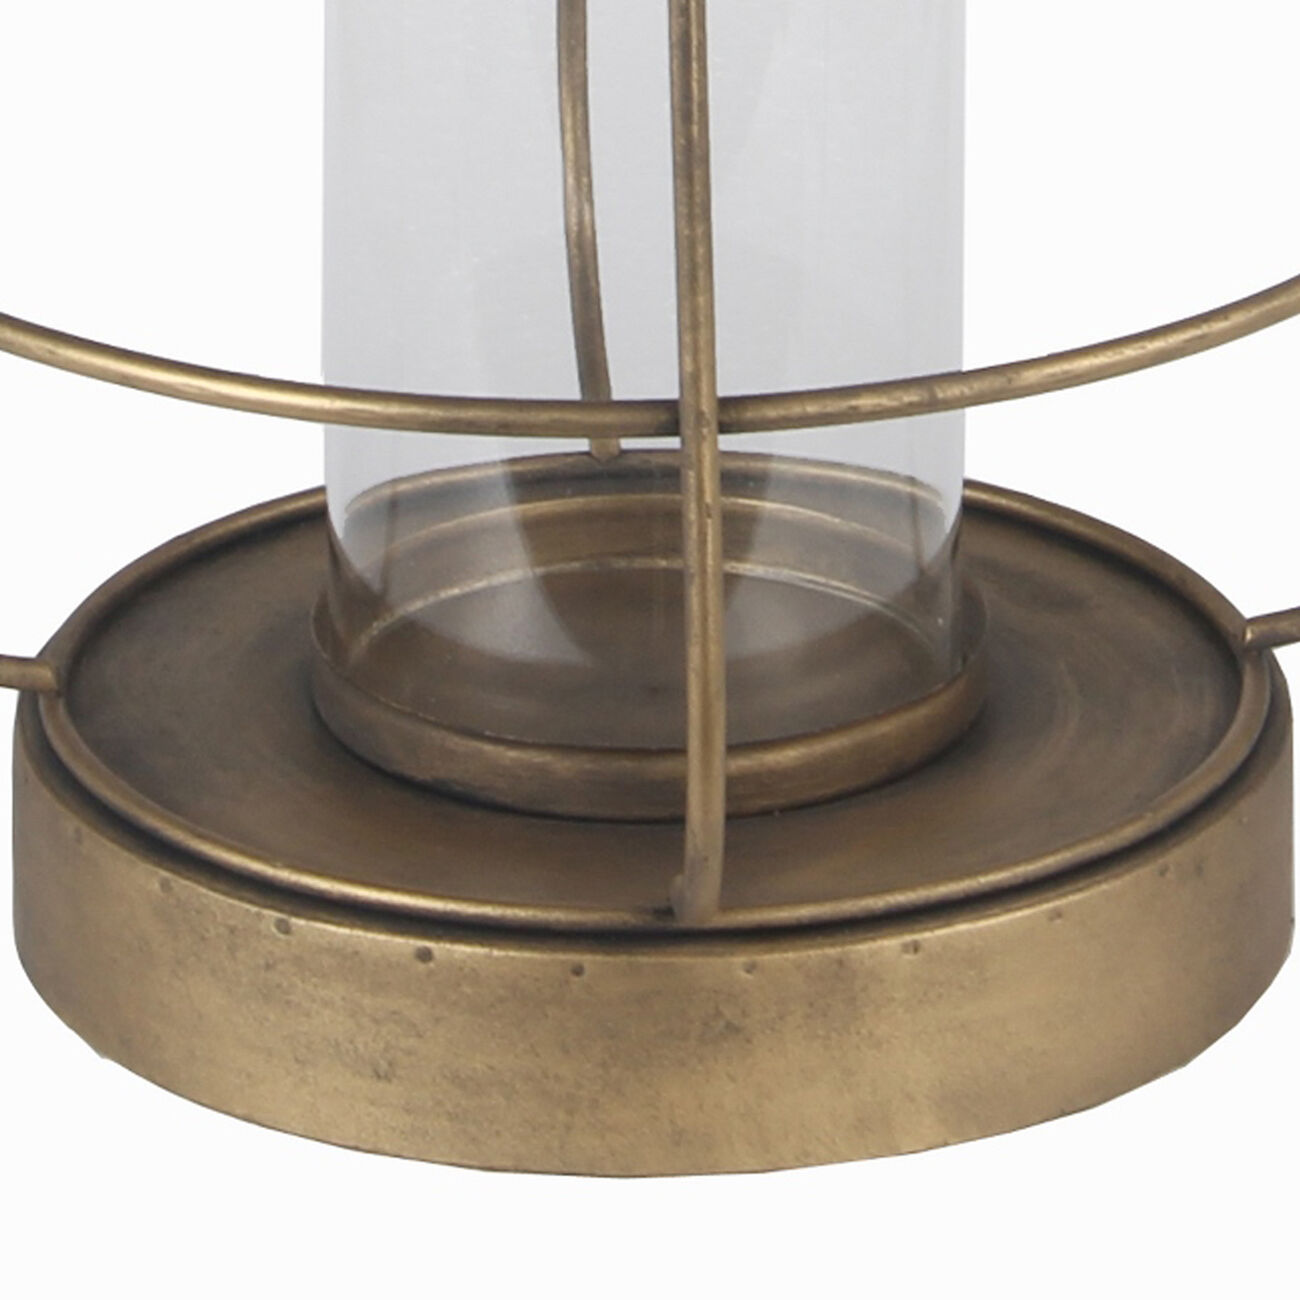 Cage Type Round Metal Lantern with Top Hook and Stable Base, Large, Gold